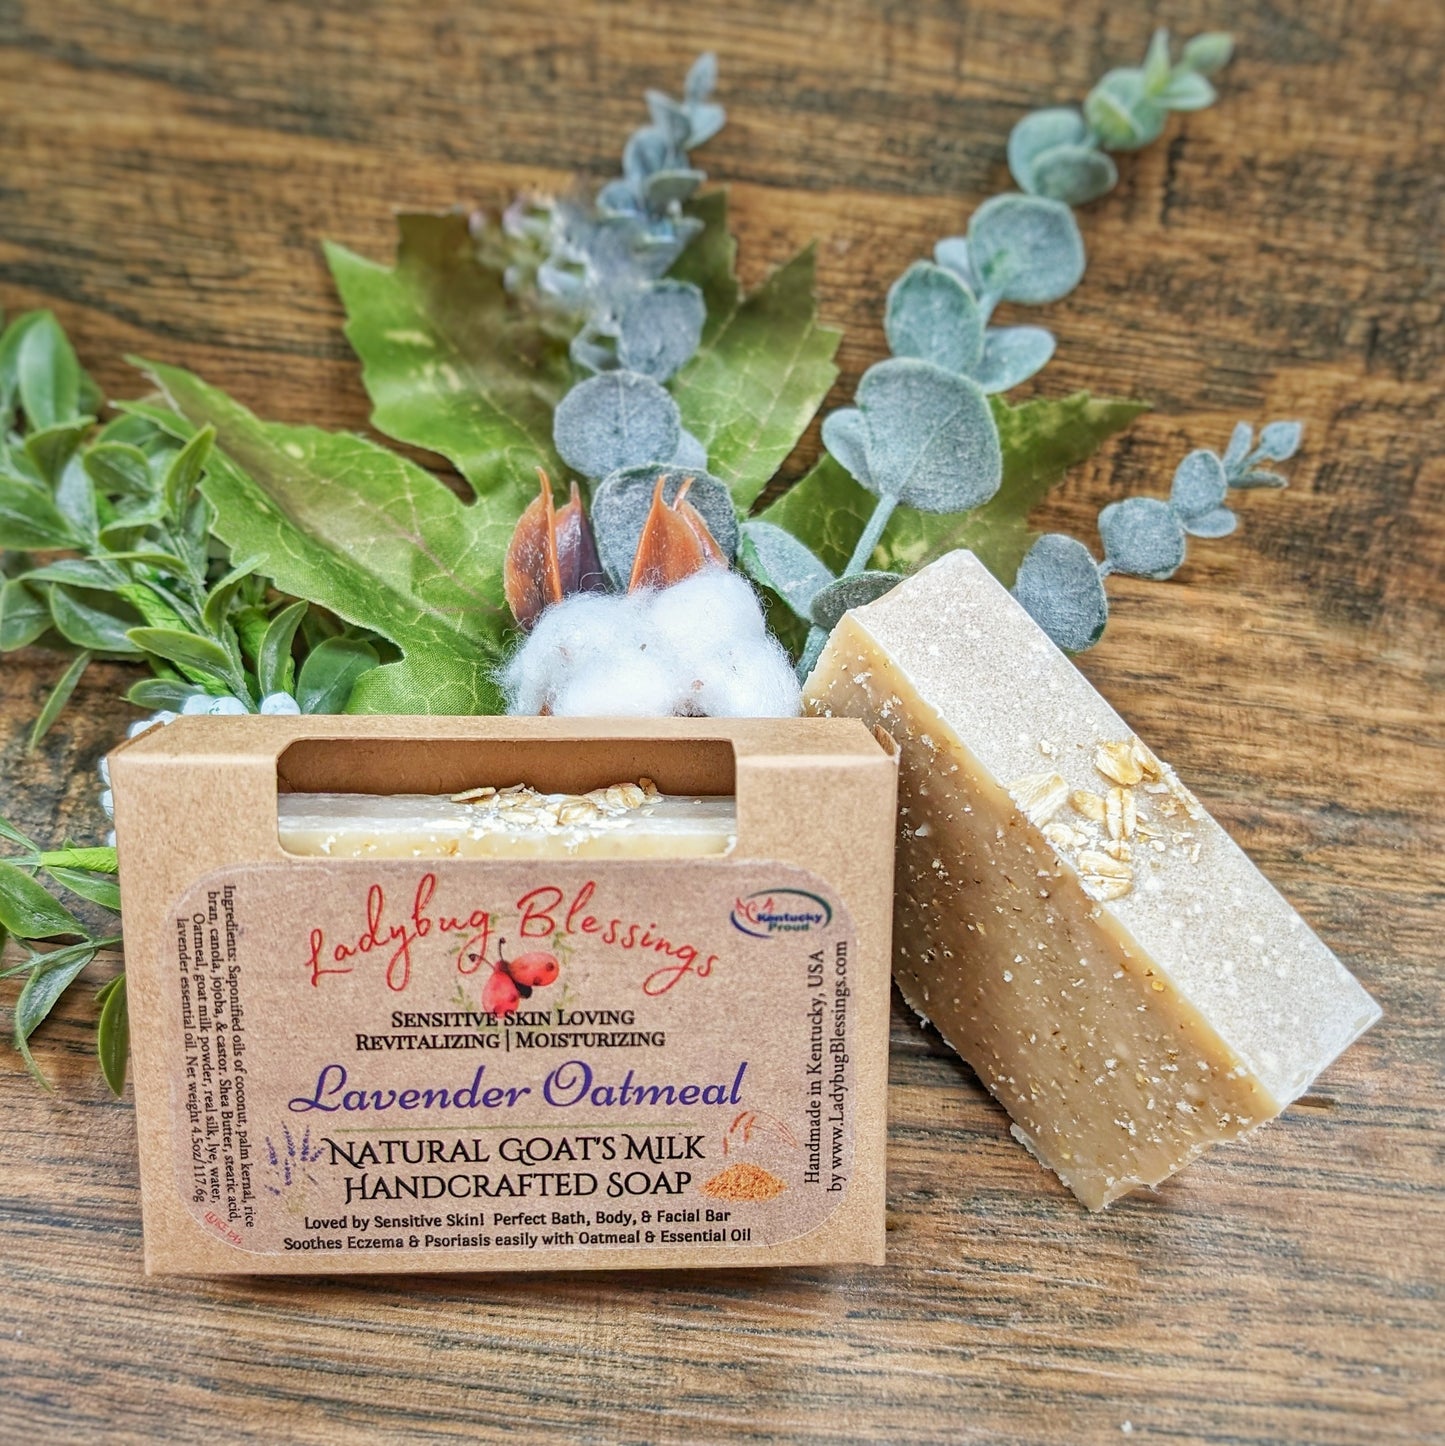 Handcrafted Oatmeal Soap